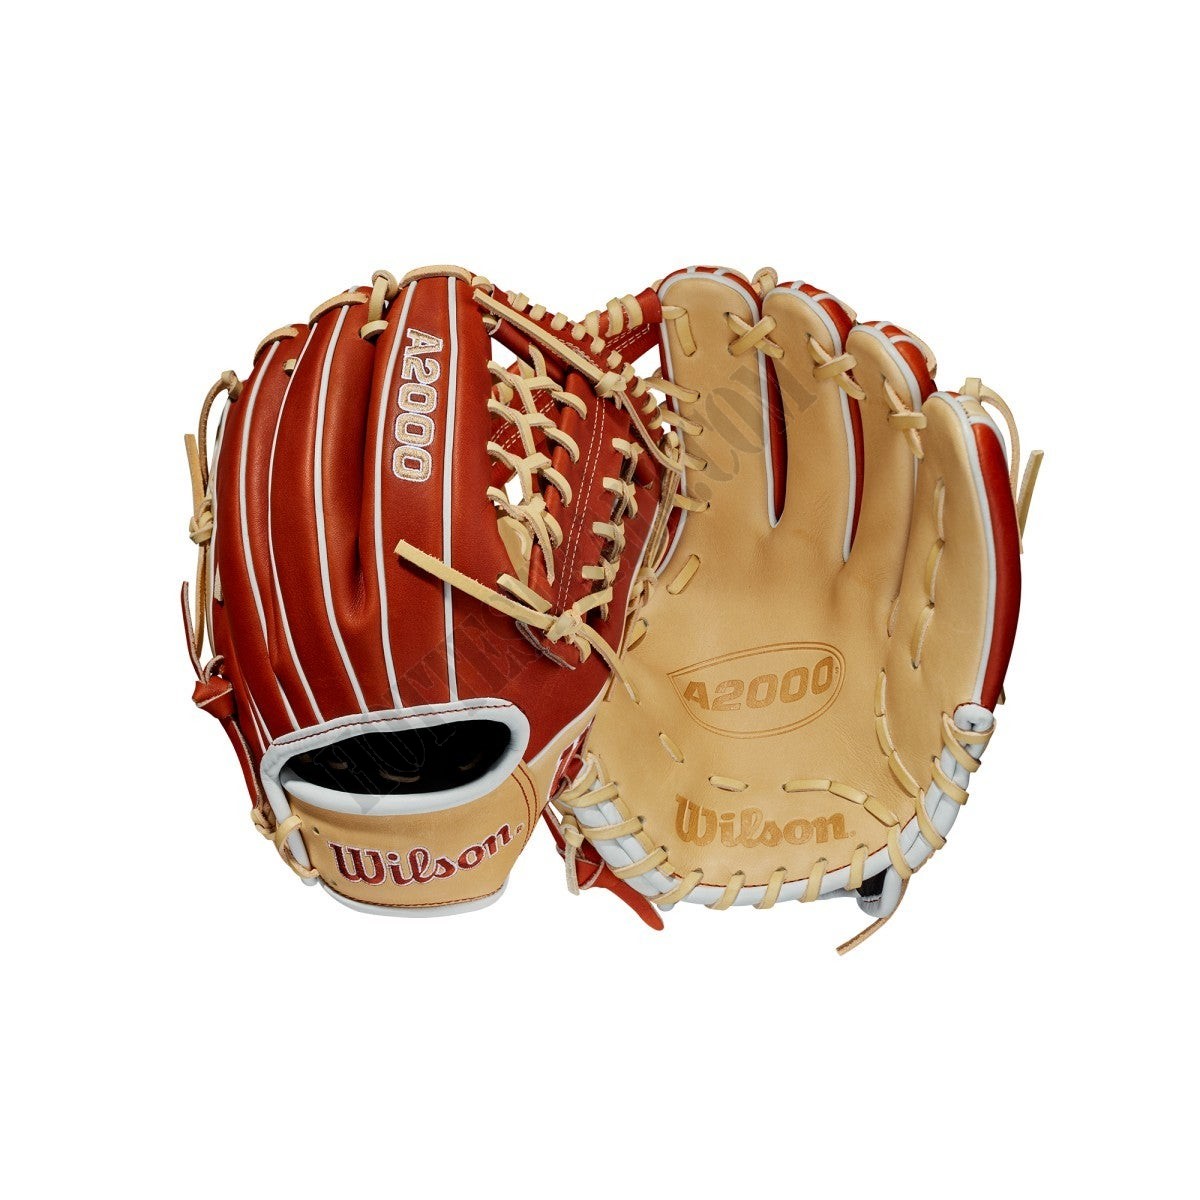 2021 A2000 1789 11.5" Utility Baseball Glove ● Wilson Promotions - 2021 A2000 1789 11.5" Utility Baseball Glove ● Wilson Promotions